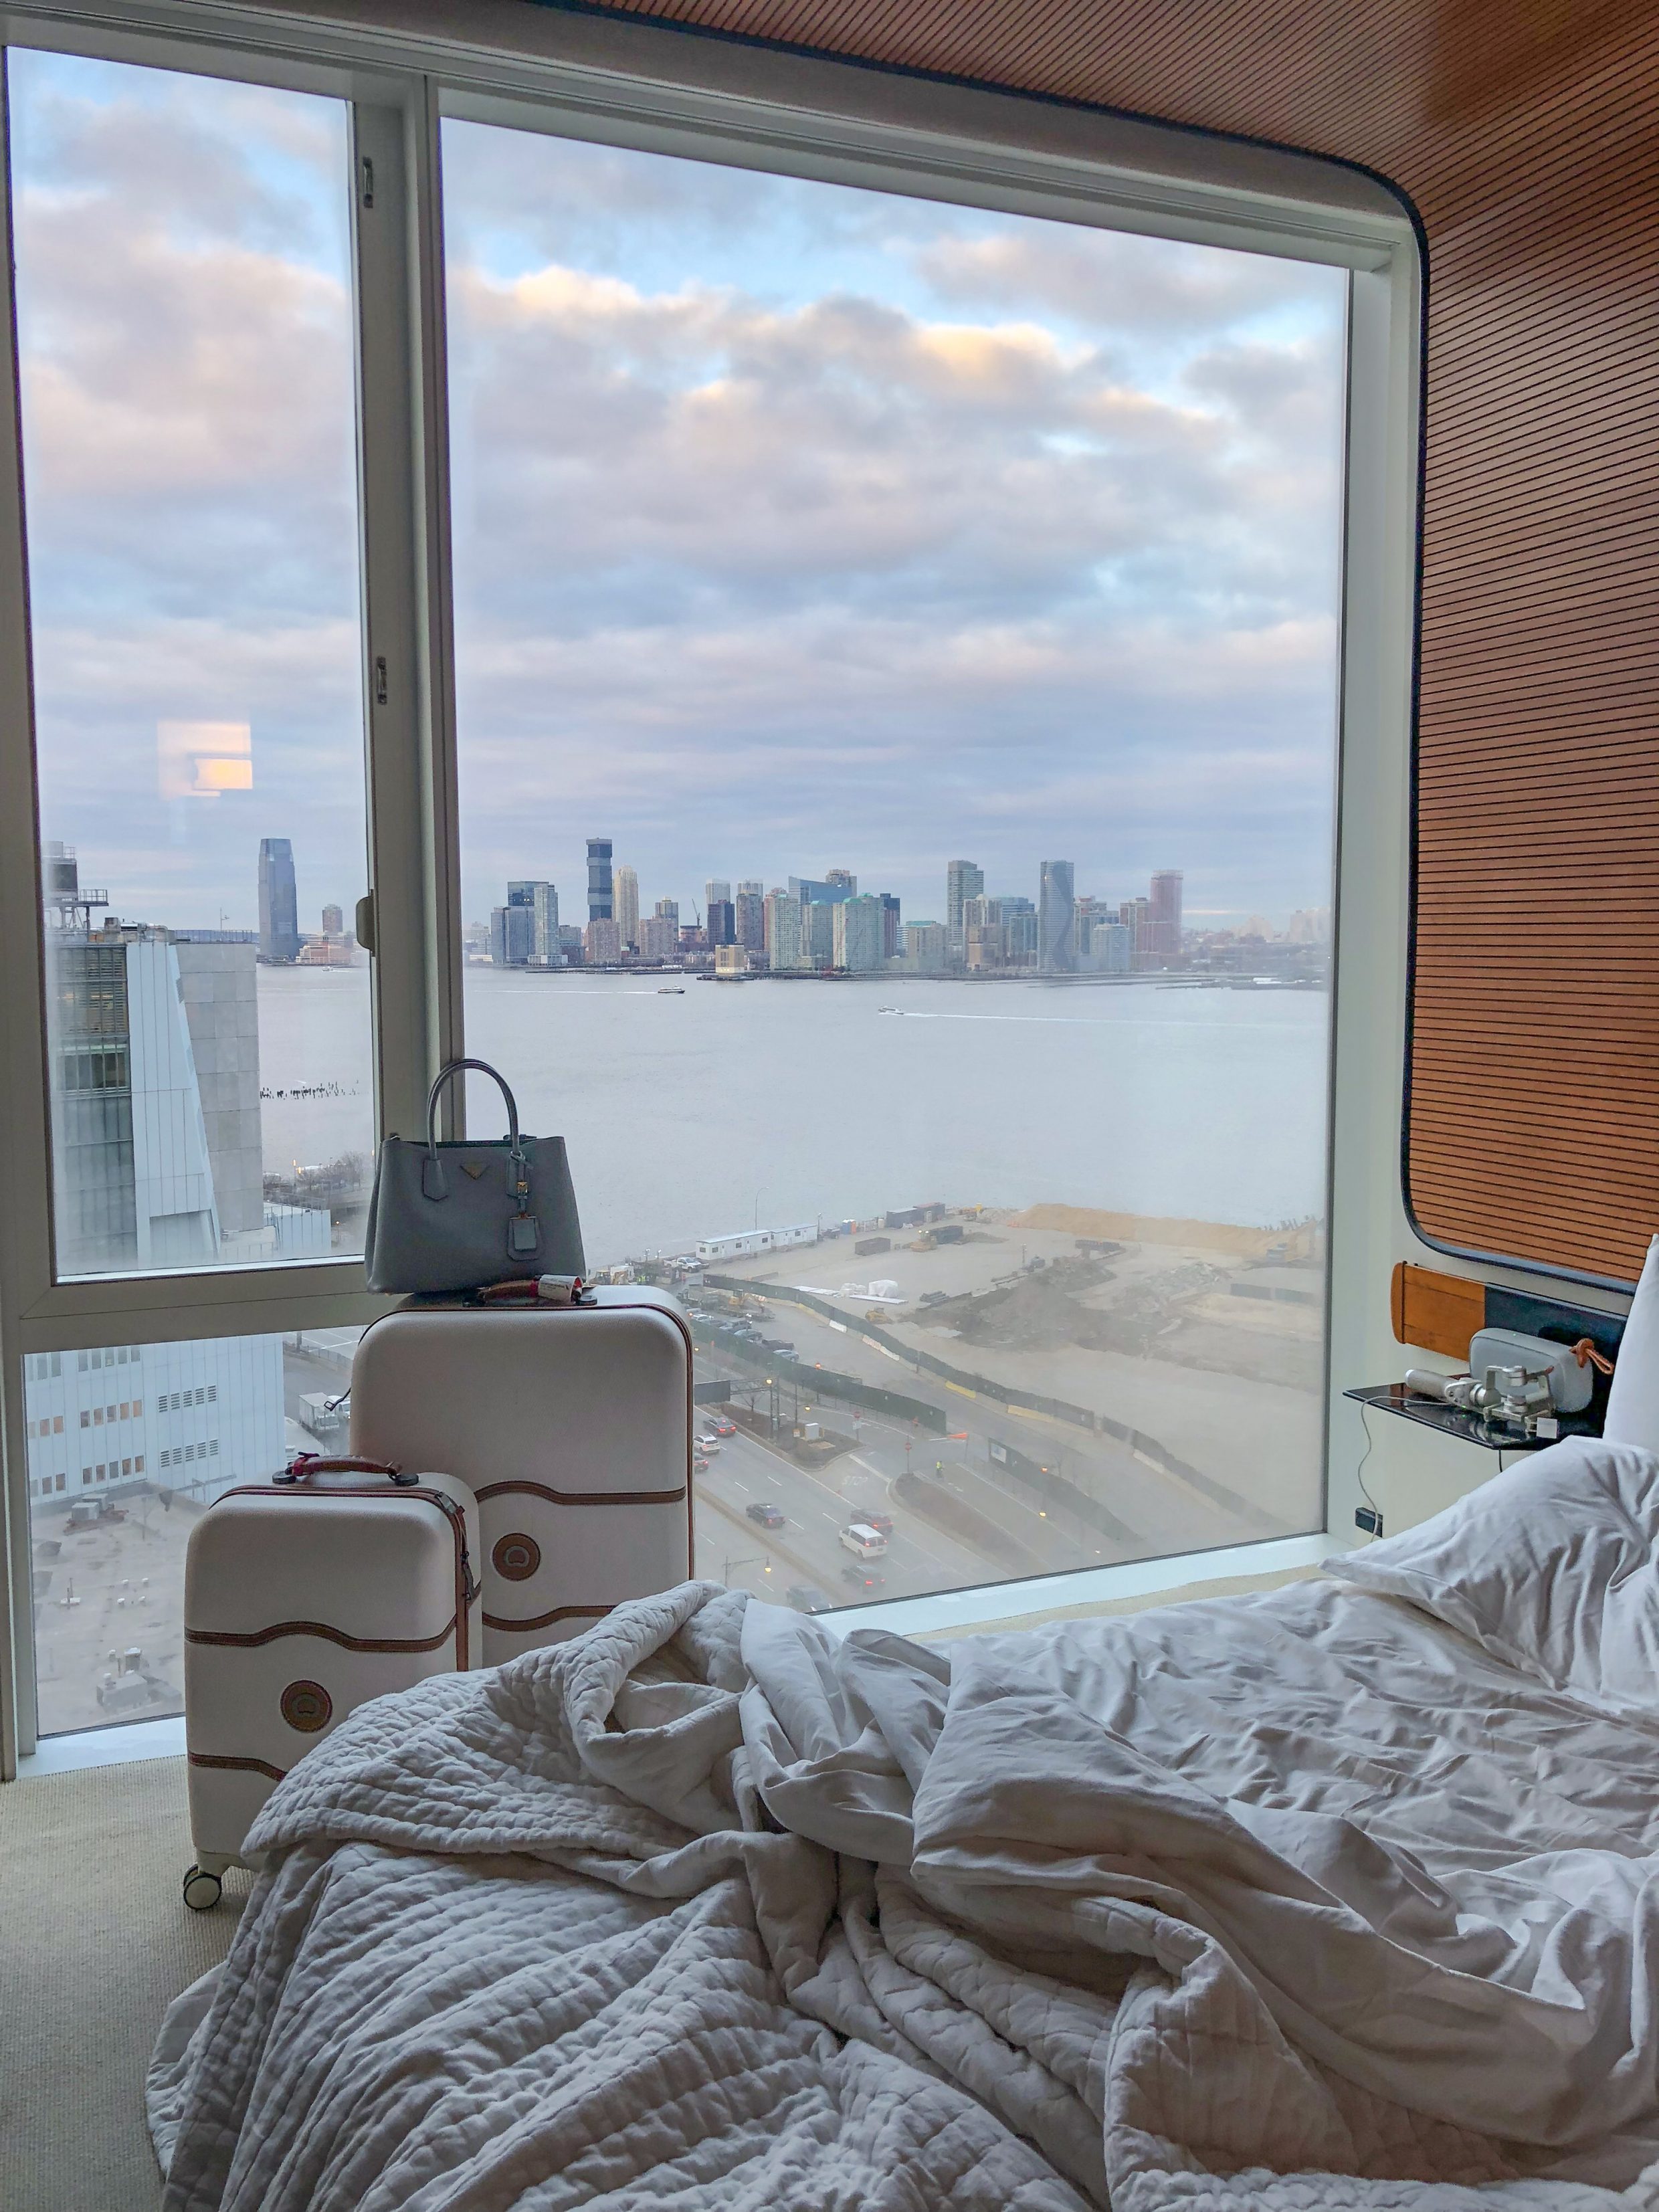 New York City Travel Guide: View of the Hudson River from the Standard Hotel